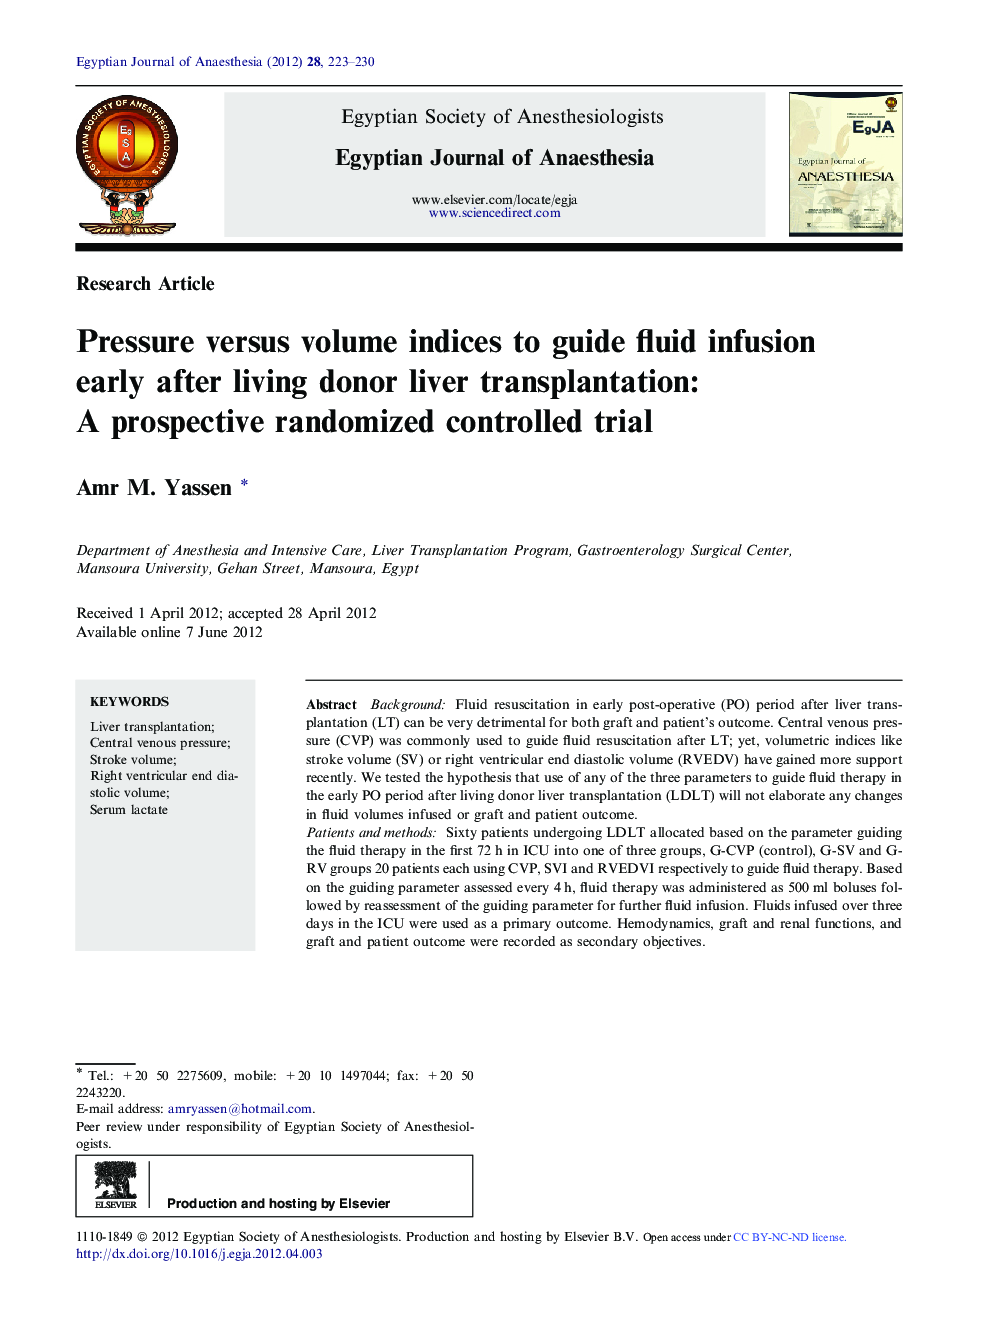 Pressure versus volume indices to guide fluid infusion early after living donor liver transplantation: A prospective randomized controlled trial 